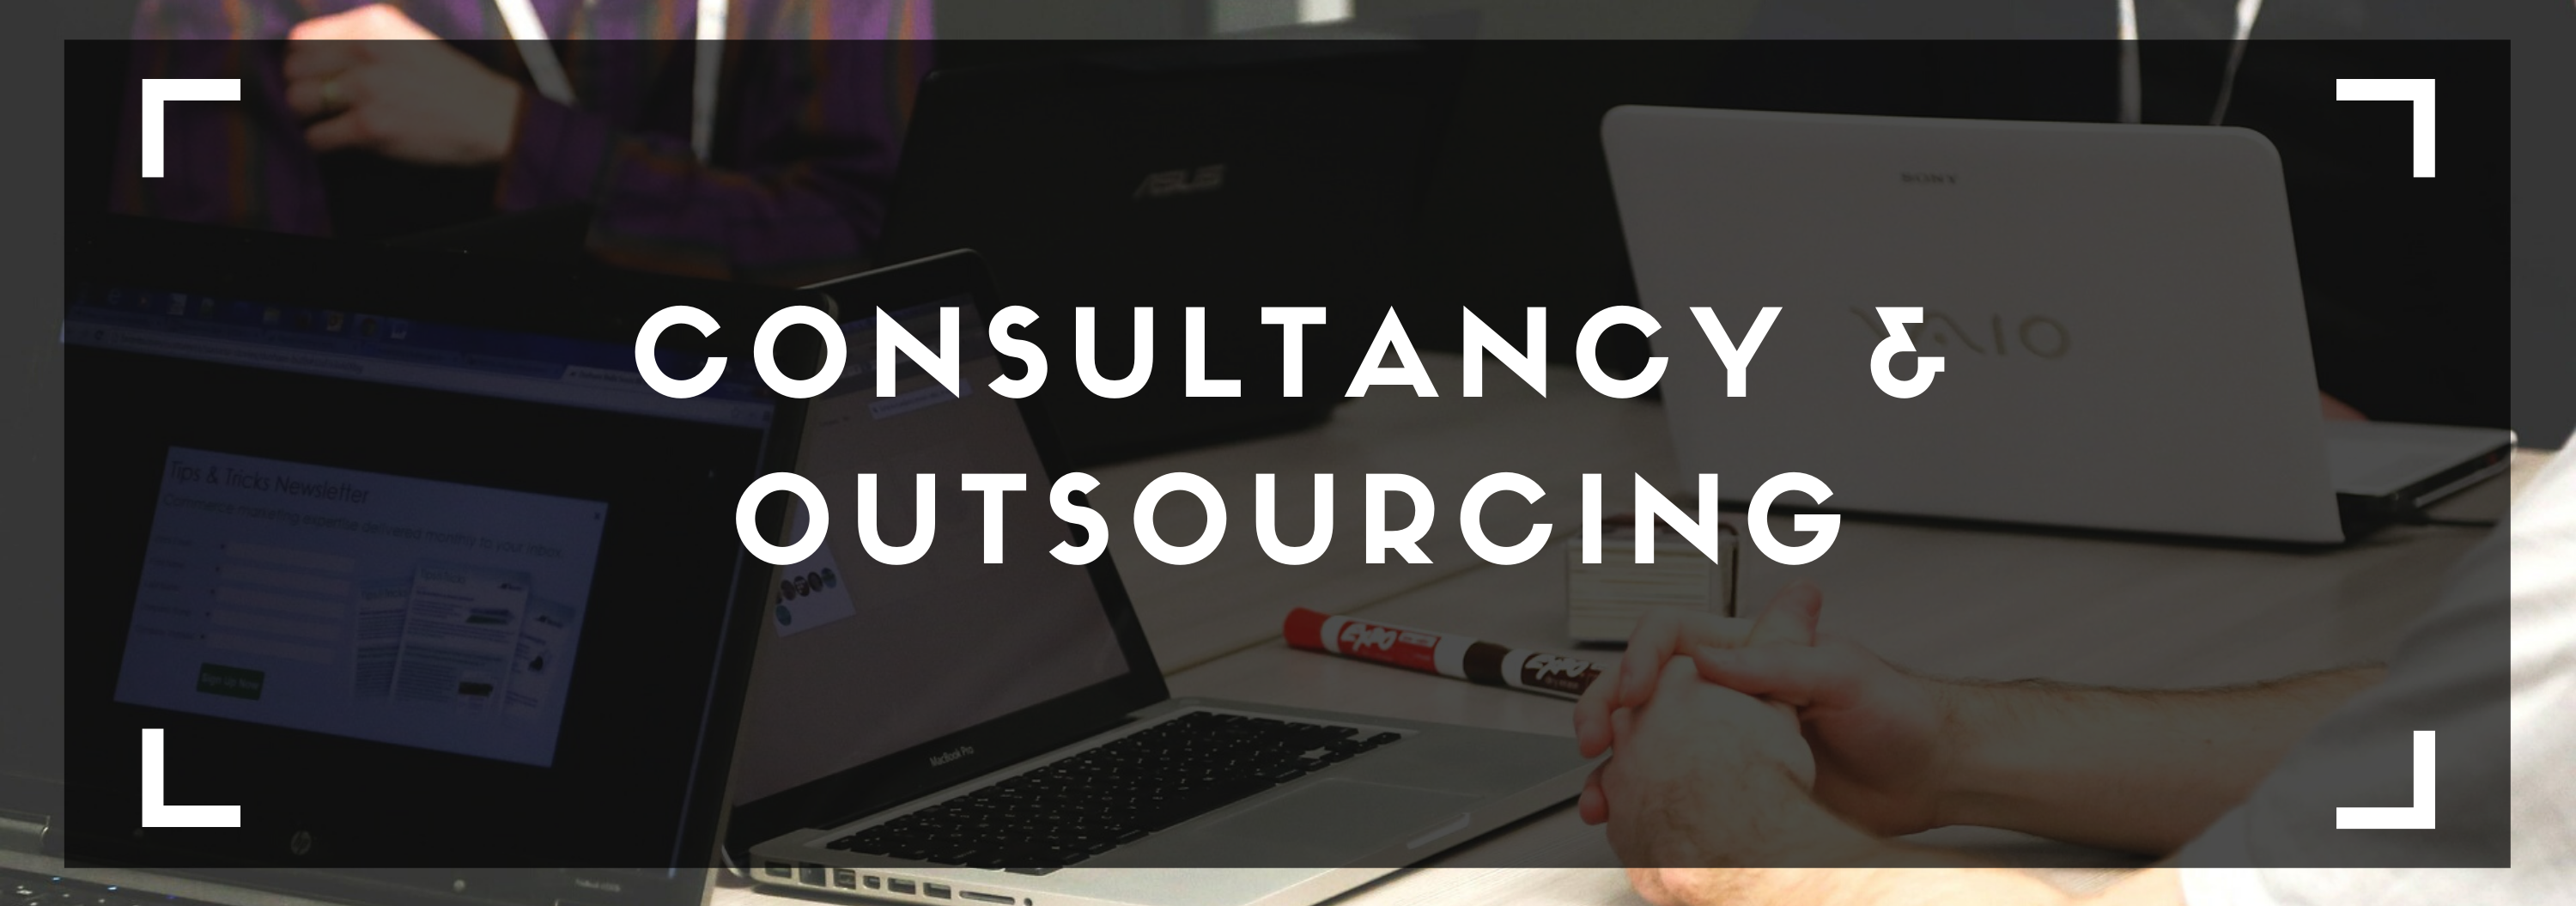 Consultancy & Outsourcing